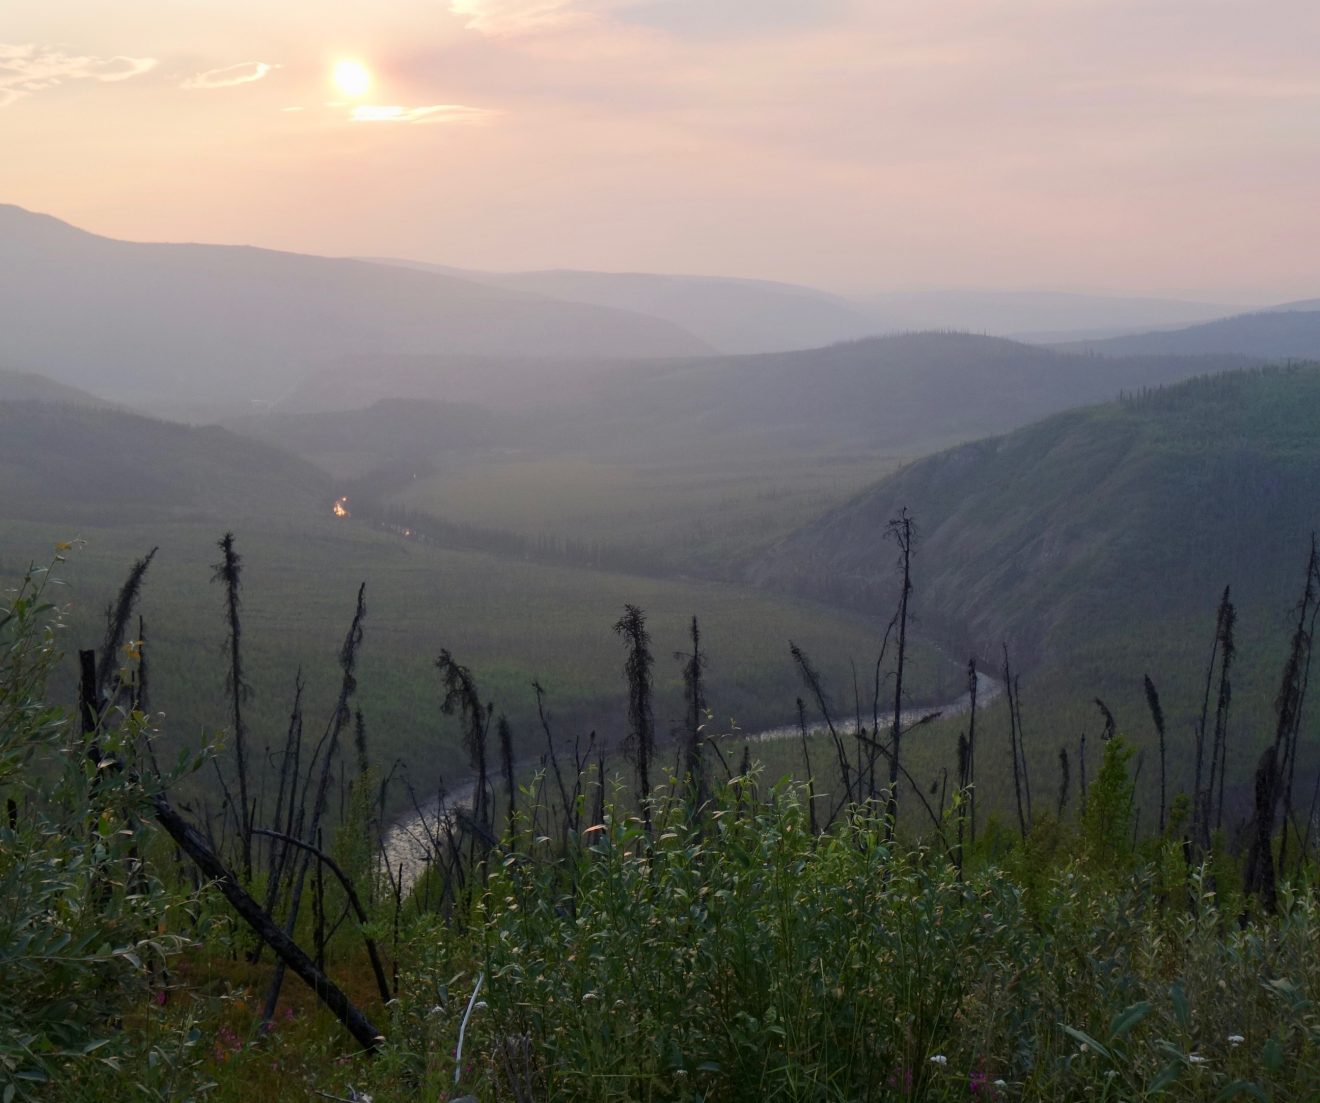 An orange sun shines through thin high clouds and a smokey sky above. A river winds through rolling hills in the distance. In the foreground are new green willows sprouting between older burned but still-standing dead black spruce trees.